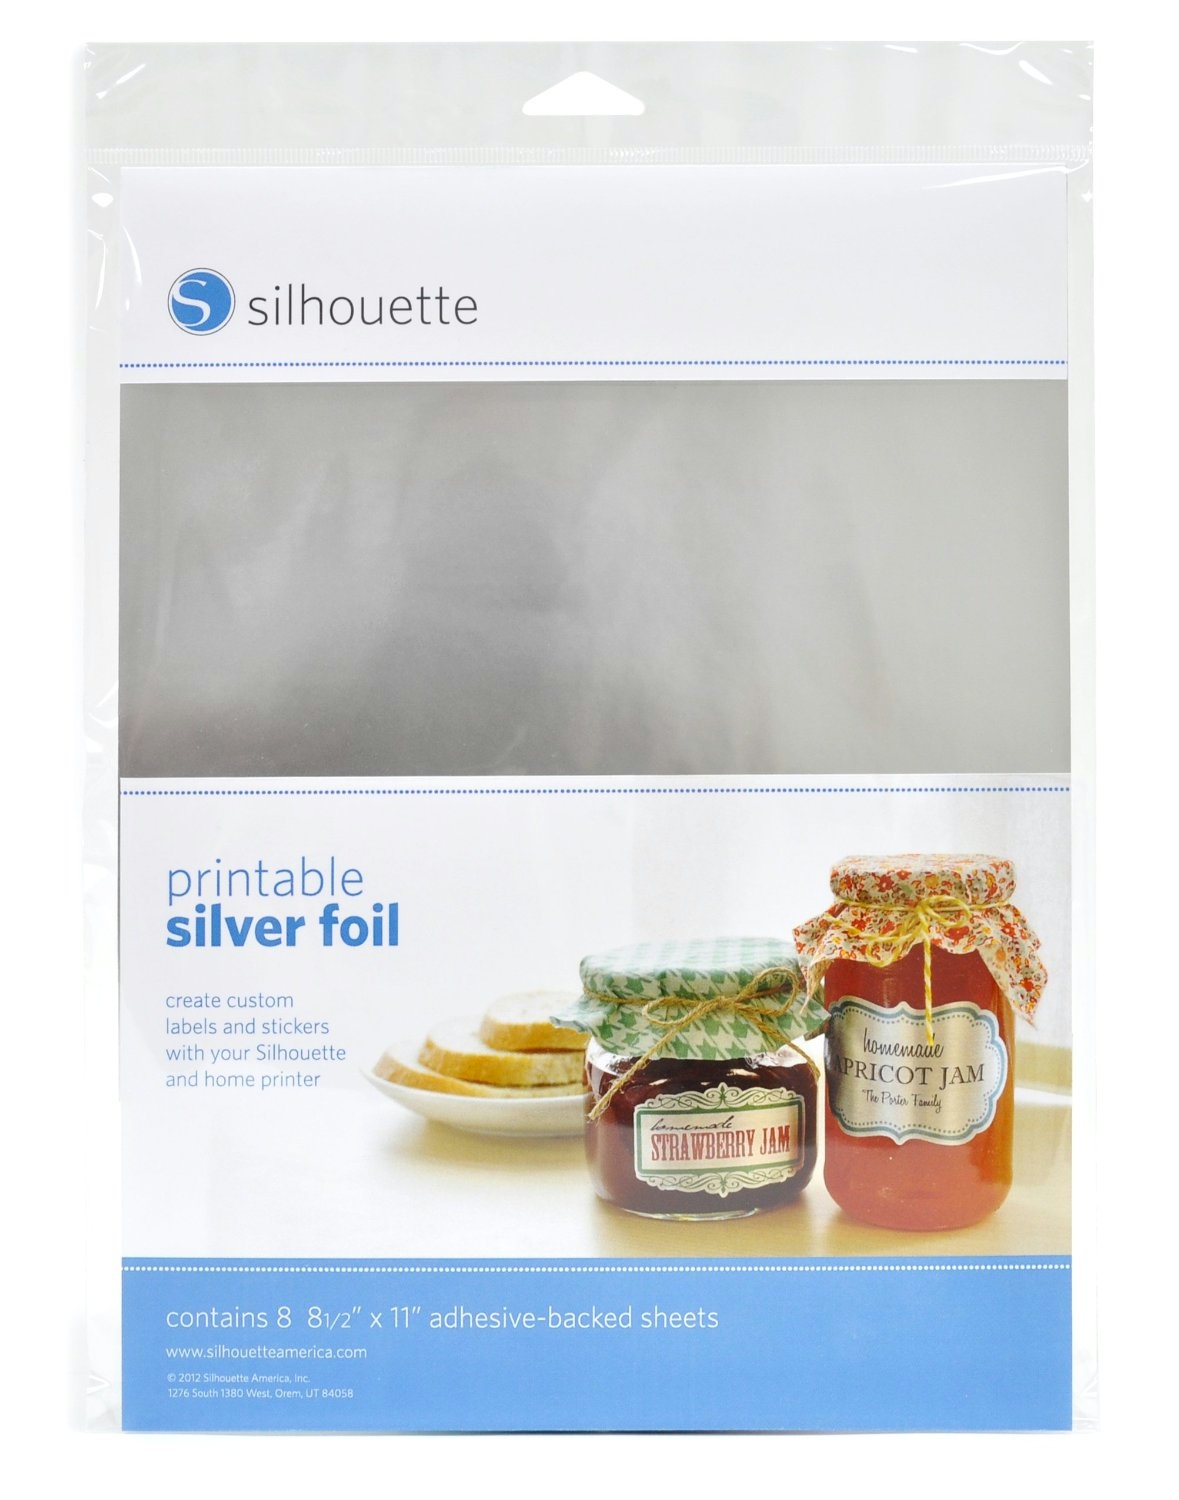 Silhouette Printable Silver Foil 8.5" x 11" Paper - 8 Sheets - CLOSEOUT